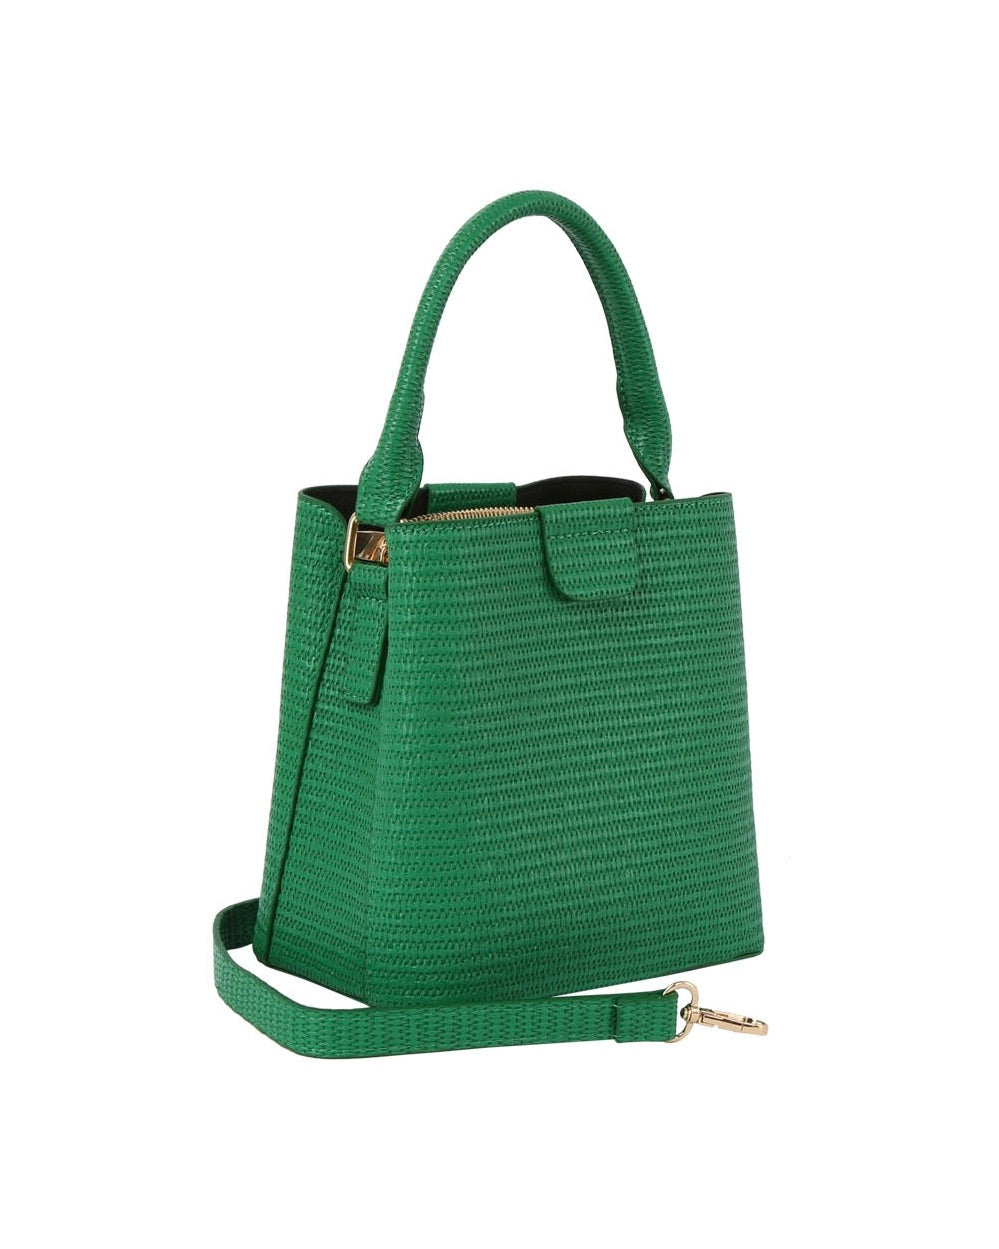 Textured Green Tote